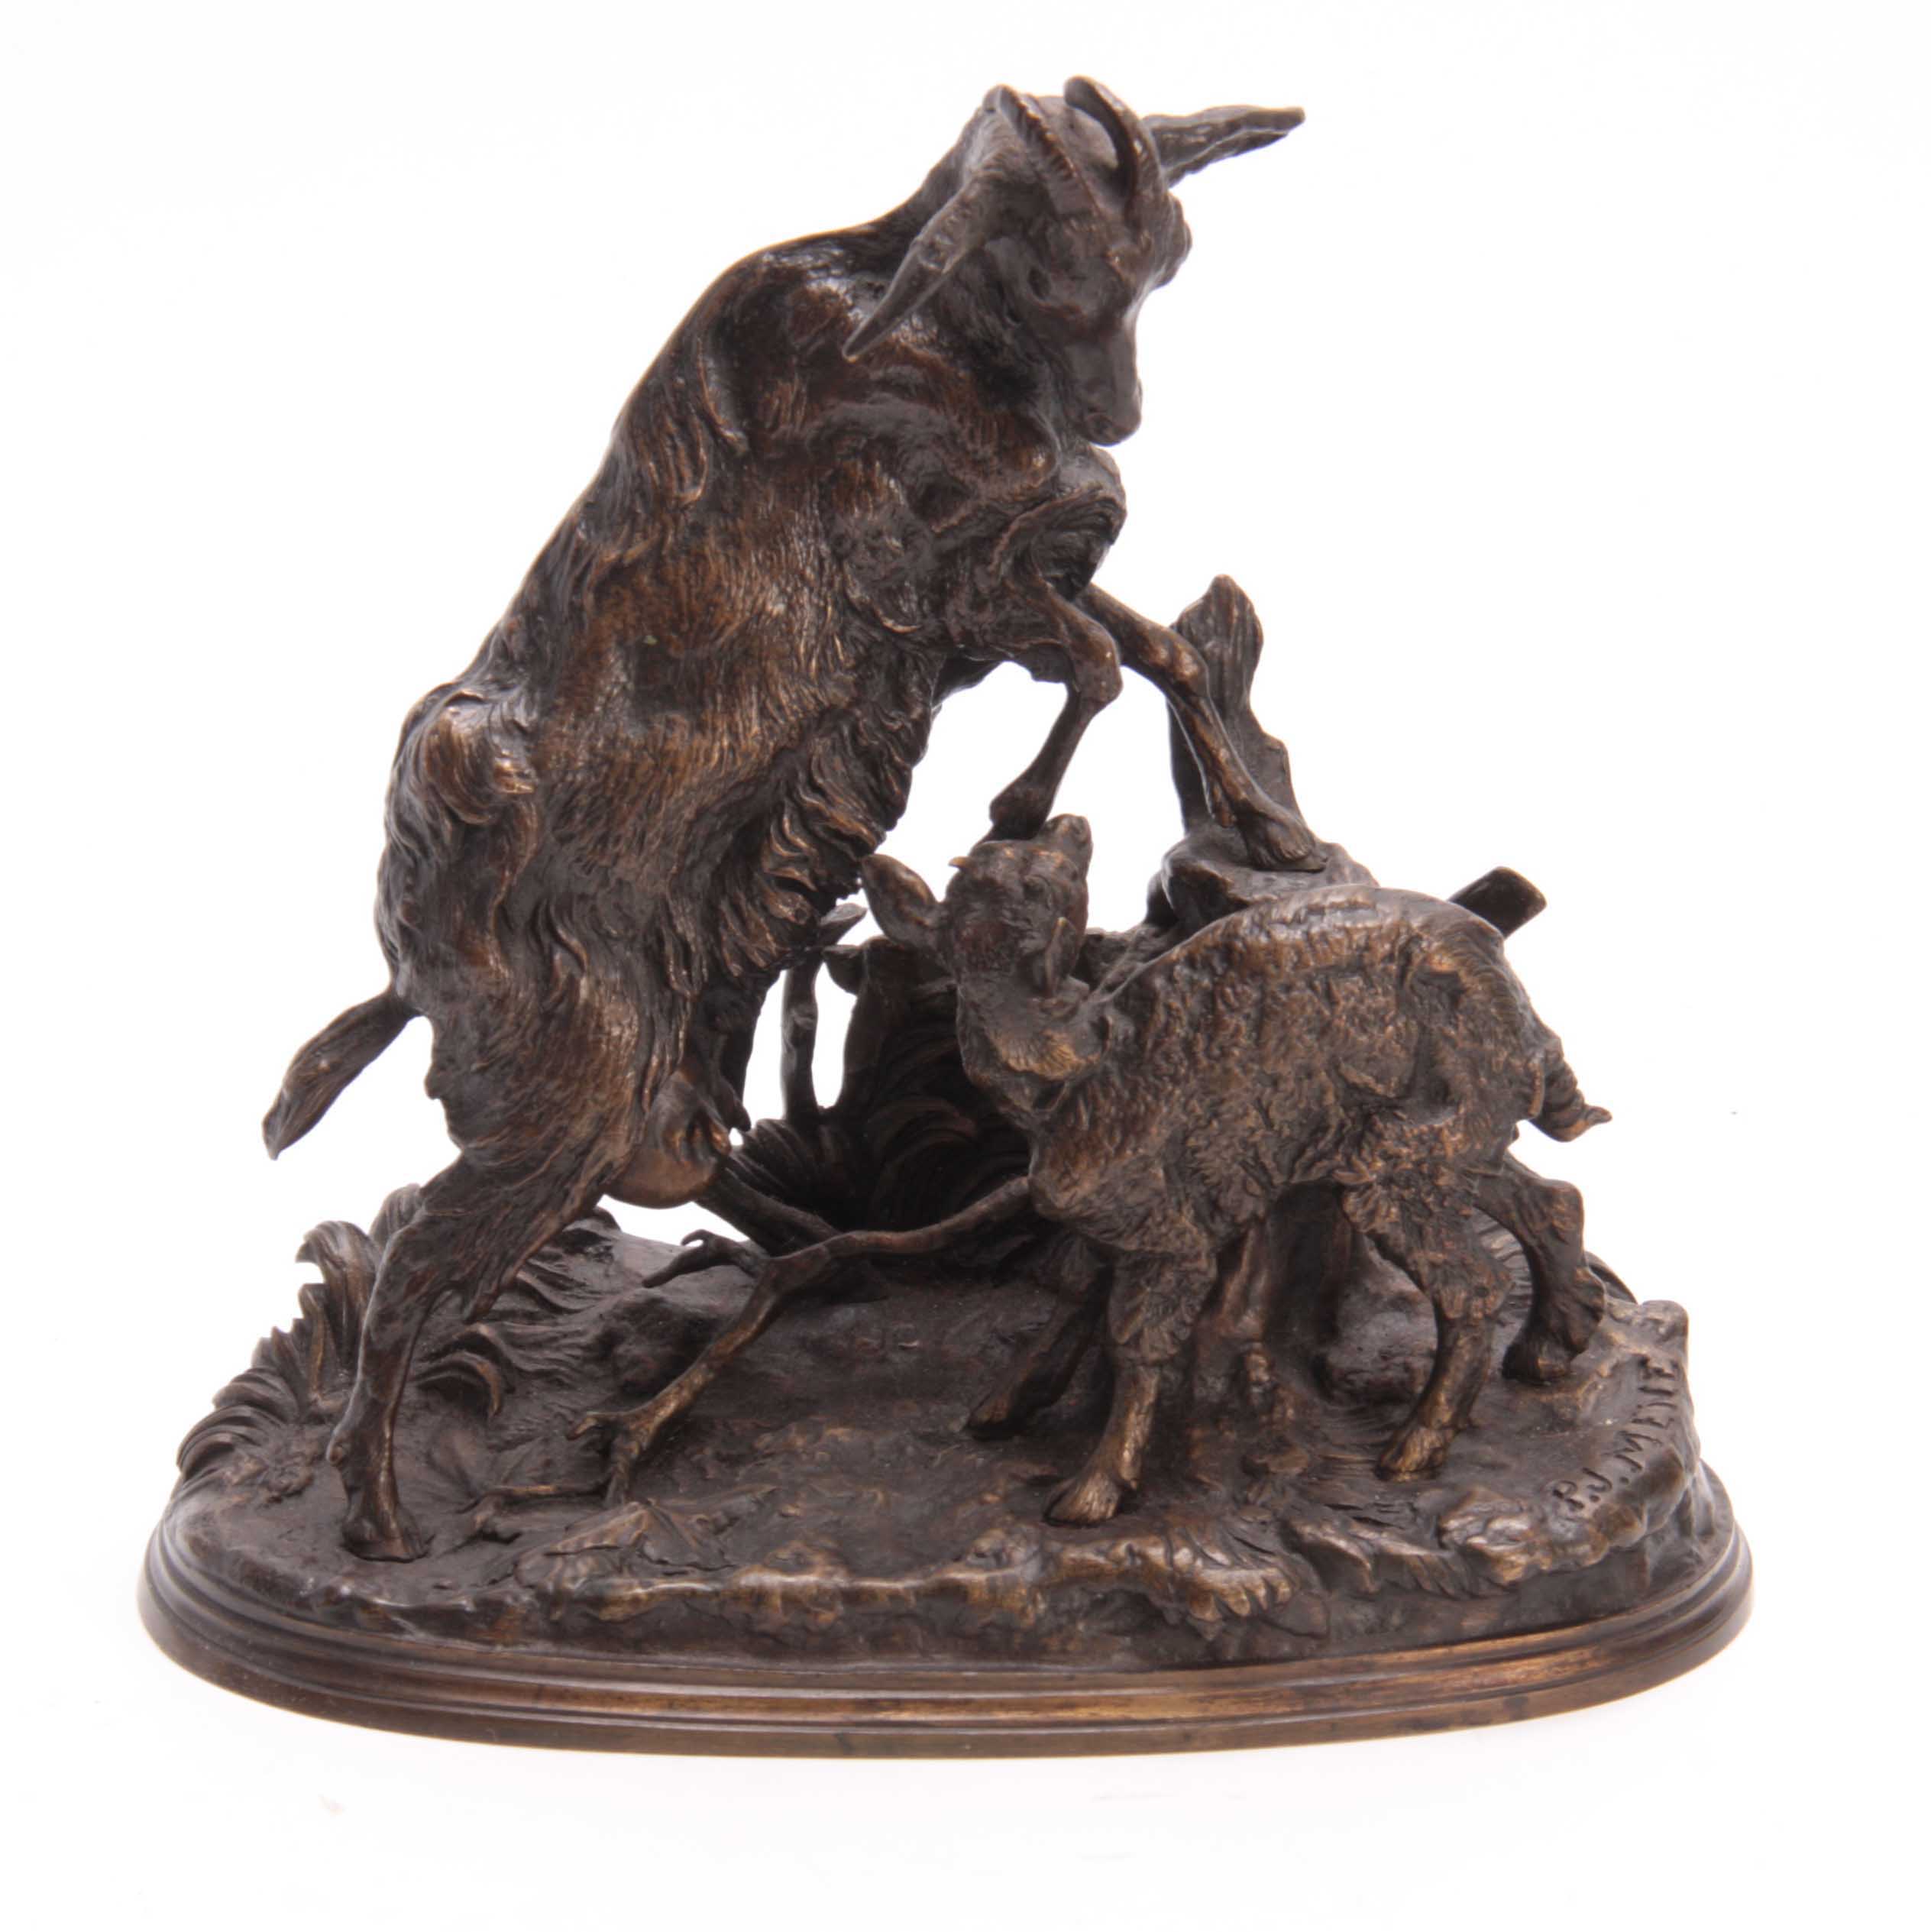 PIERRE-JULES MENE A LATE 19th CENTURY FRENCH PATINATED BRONZE GROUP modelled as a nanny goat with